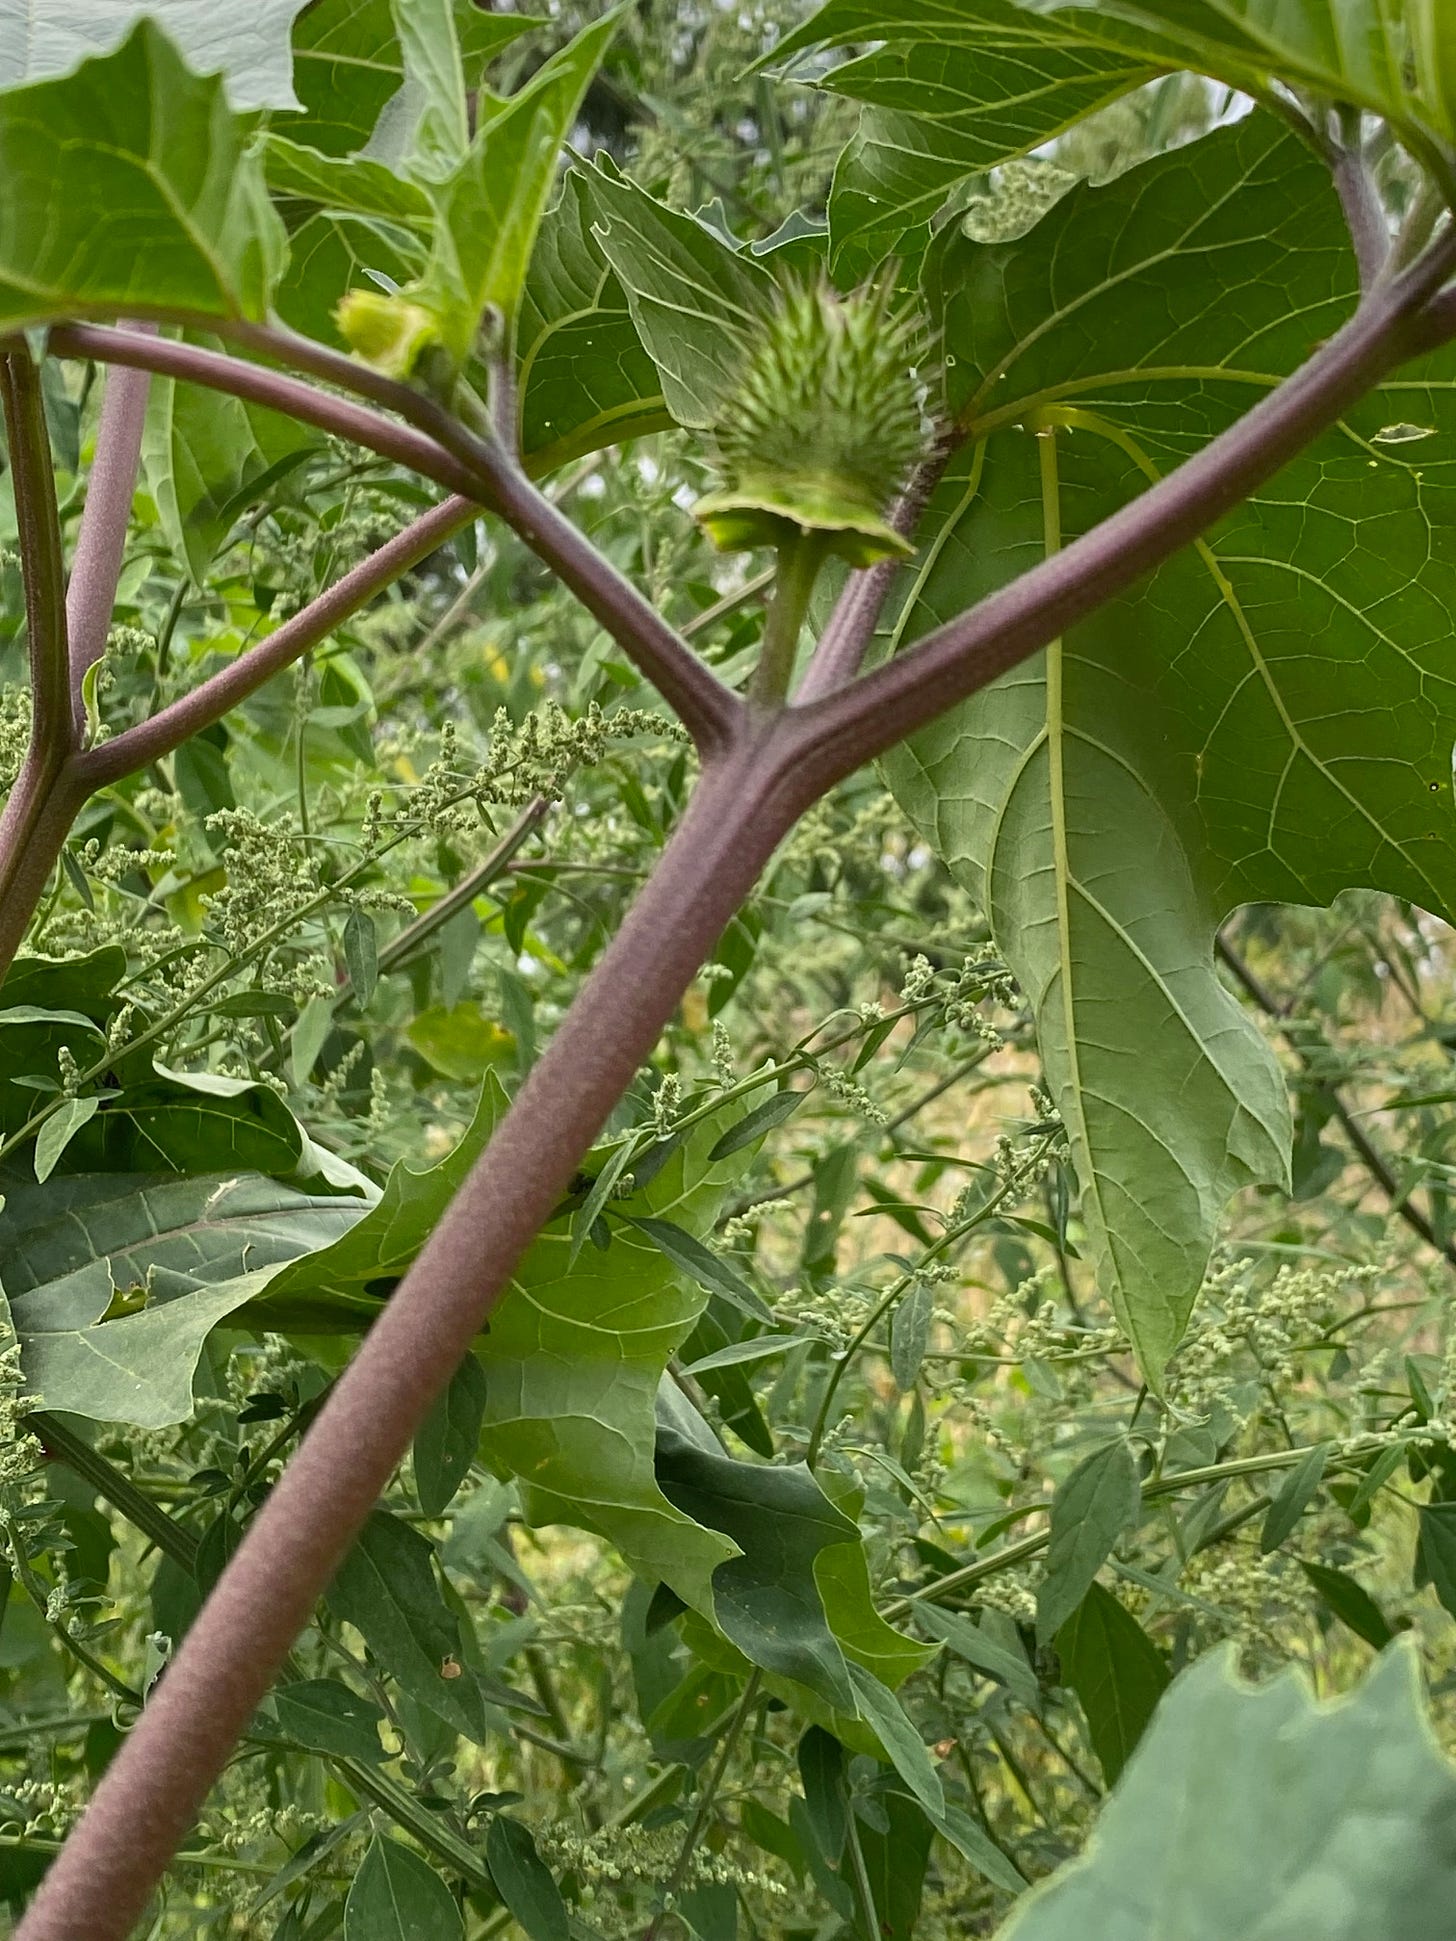 hairless stems and leaves, upright thorny seed pod of Datura stramonium